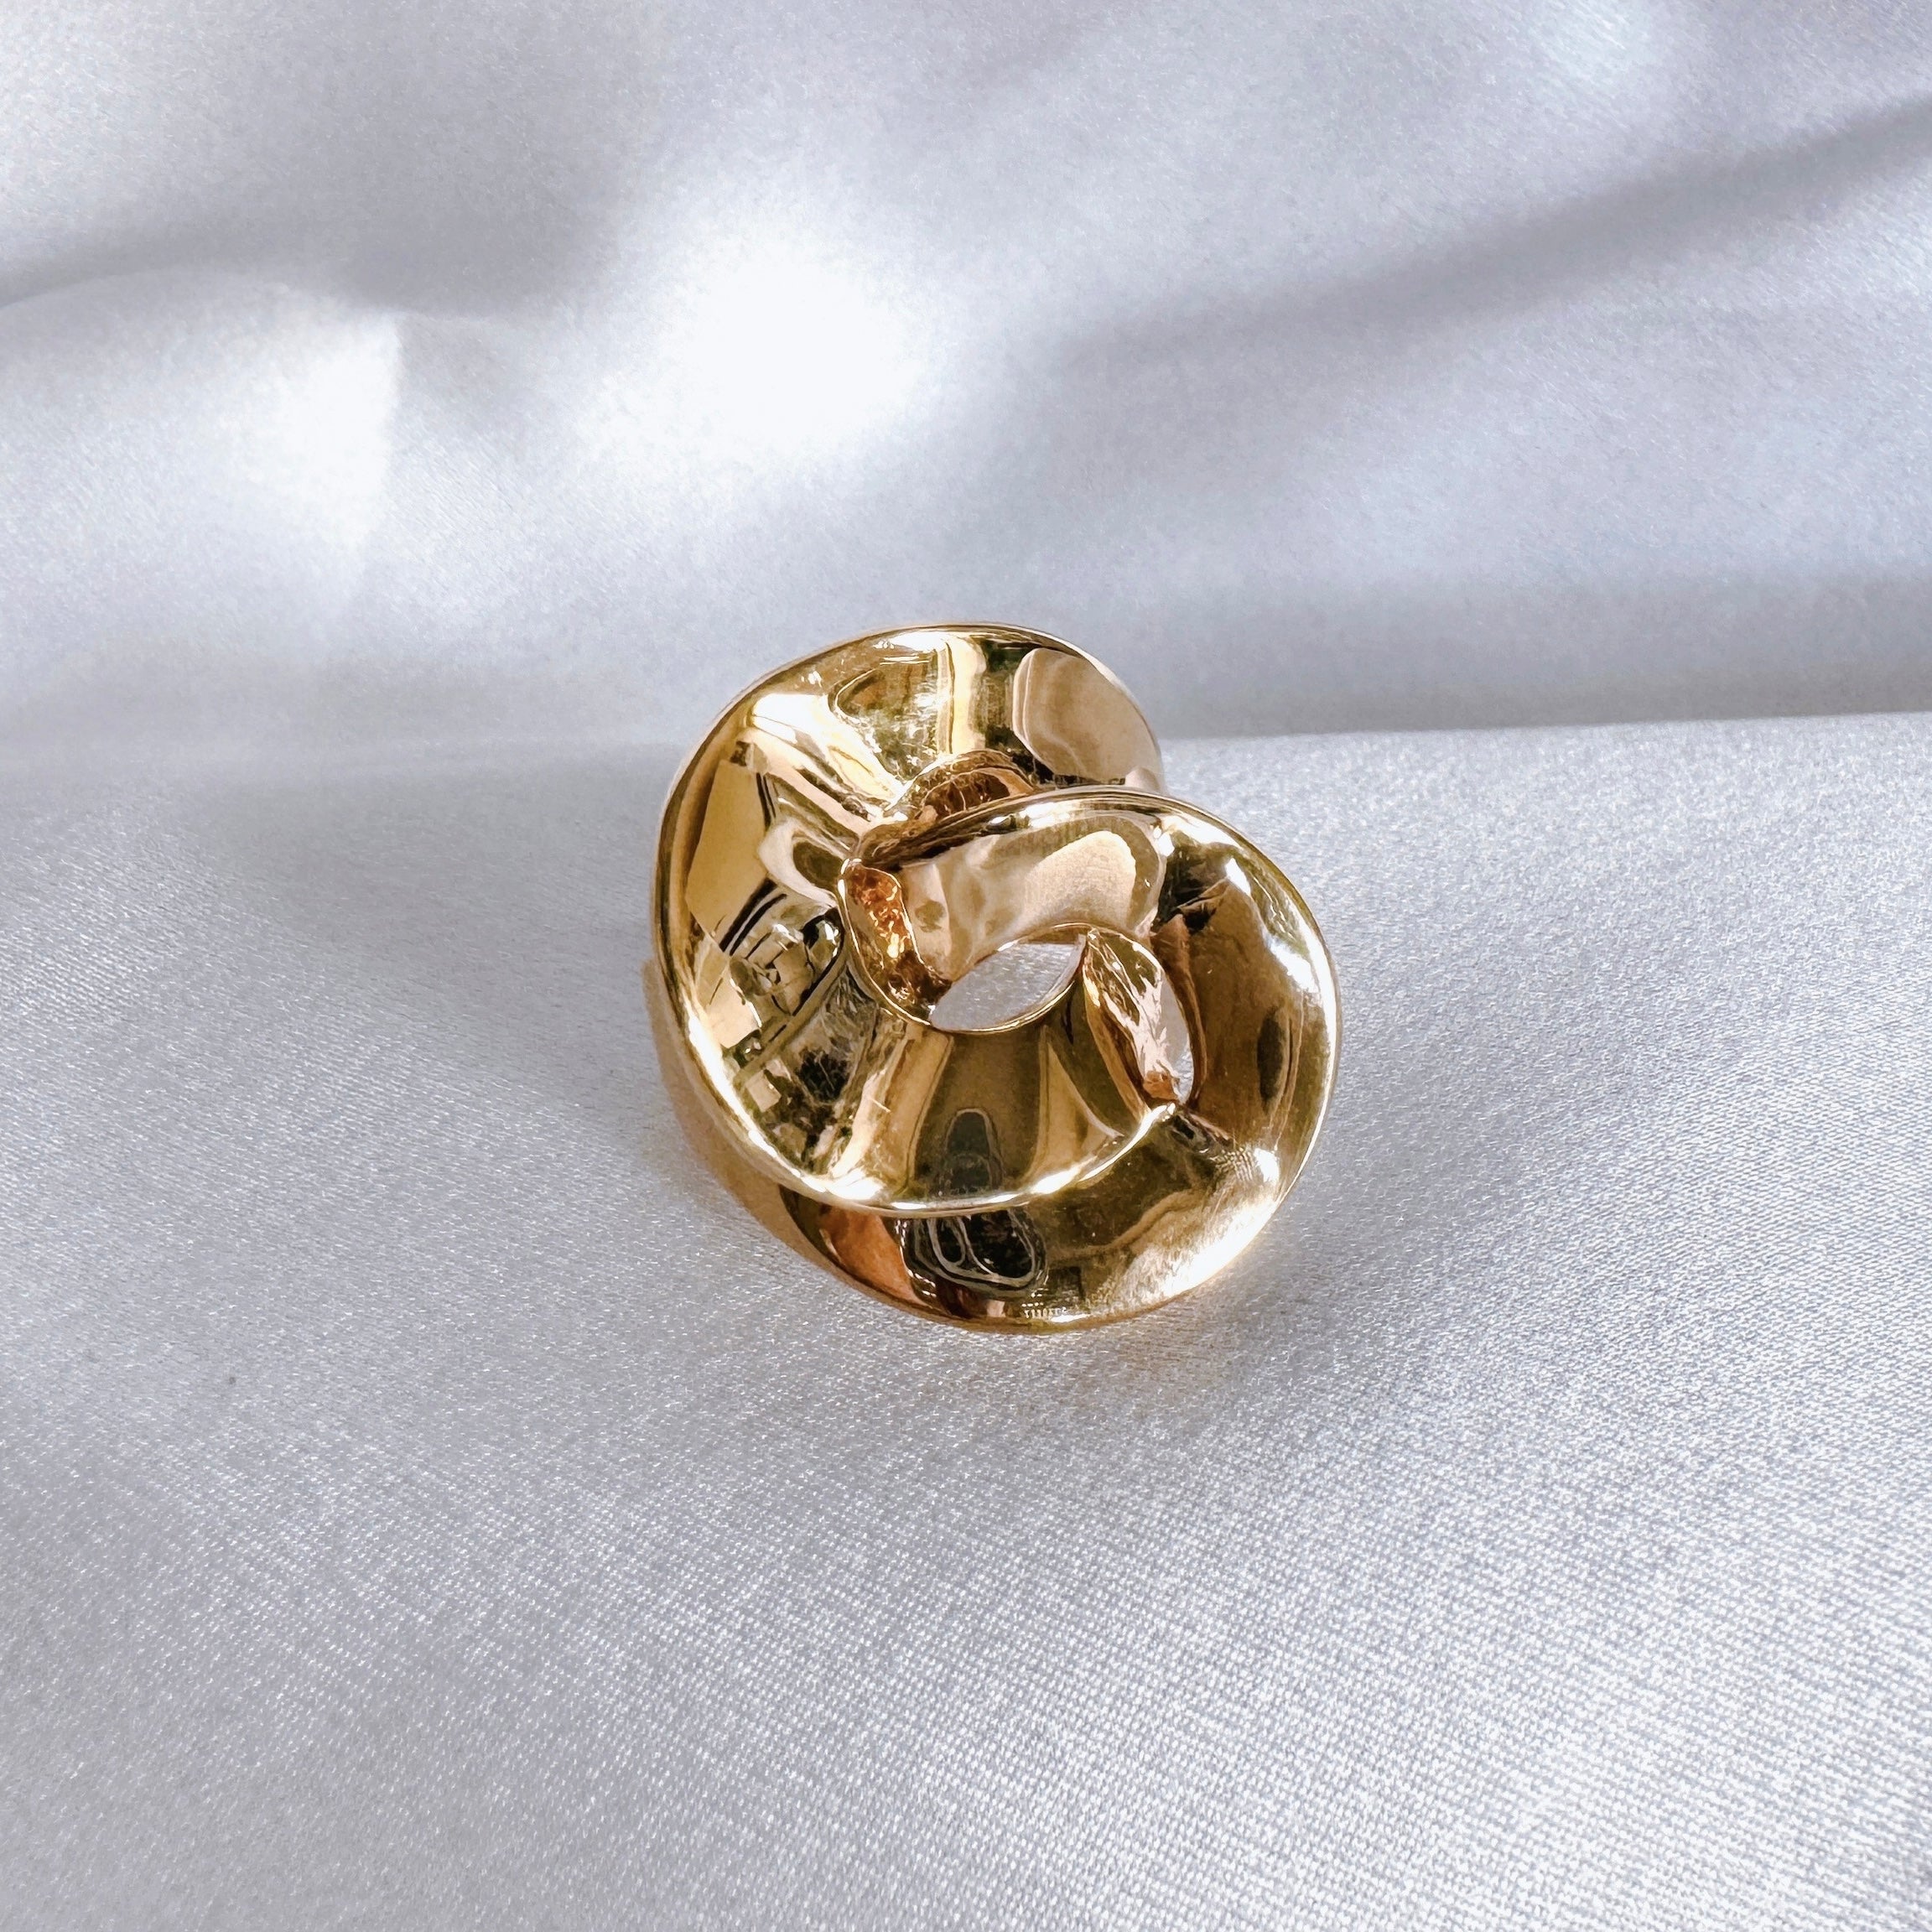 Gold-plated “Contemporary Interlaced” ring